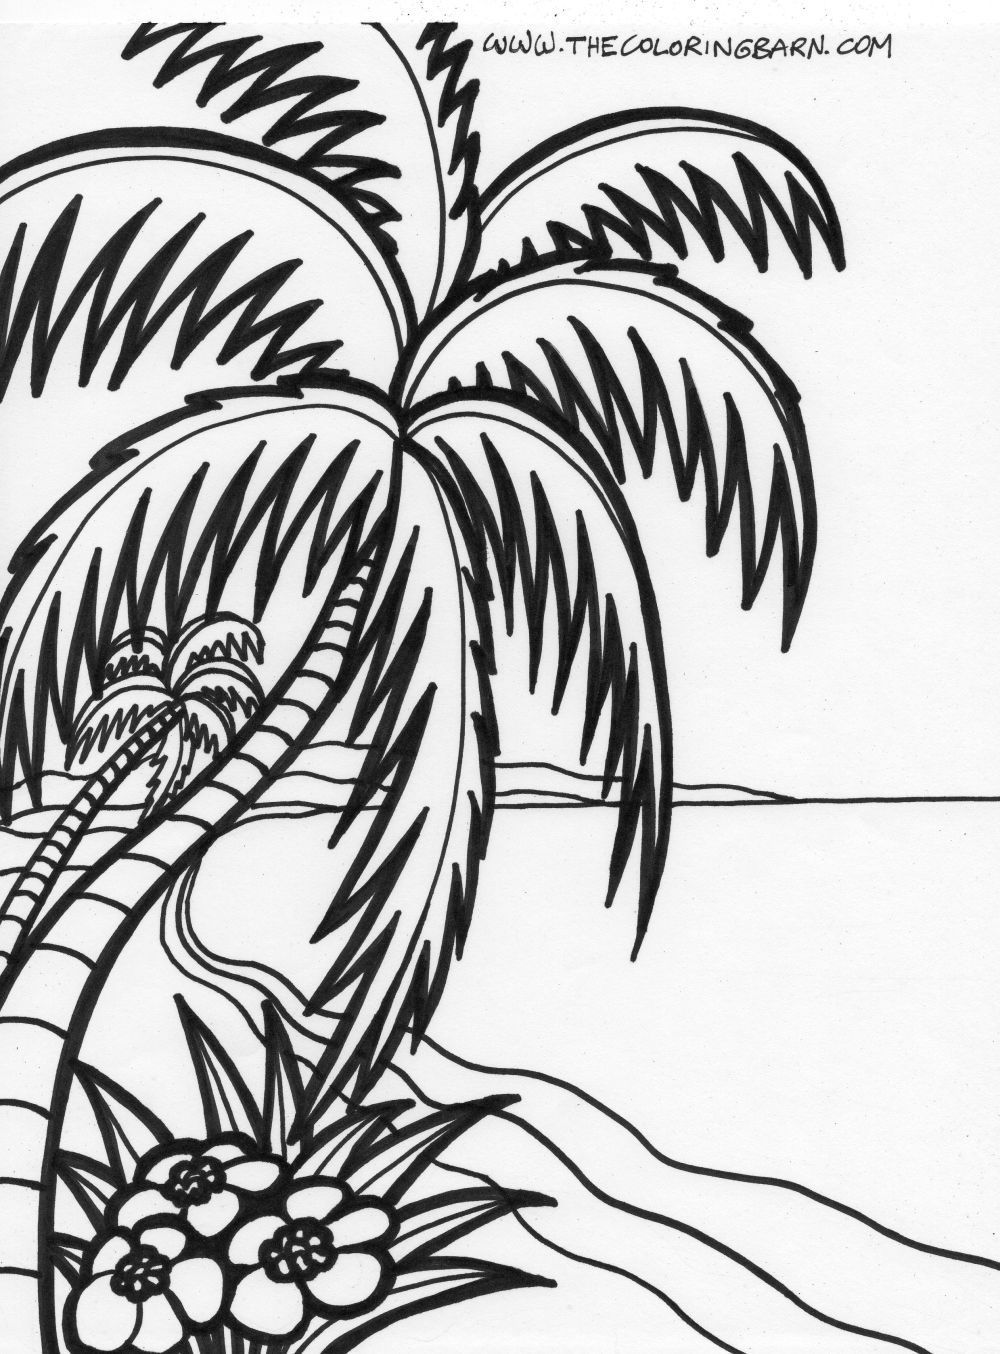 Coloring Pages On Pinterest Super Ideas Tropical Beach Coloring Pages Silhouettes Pinterest